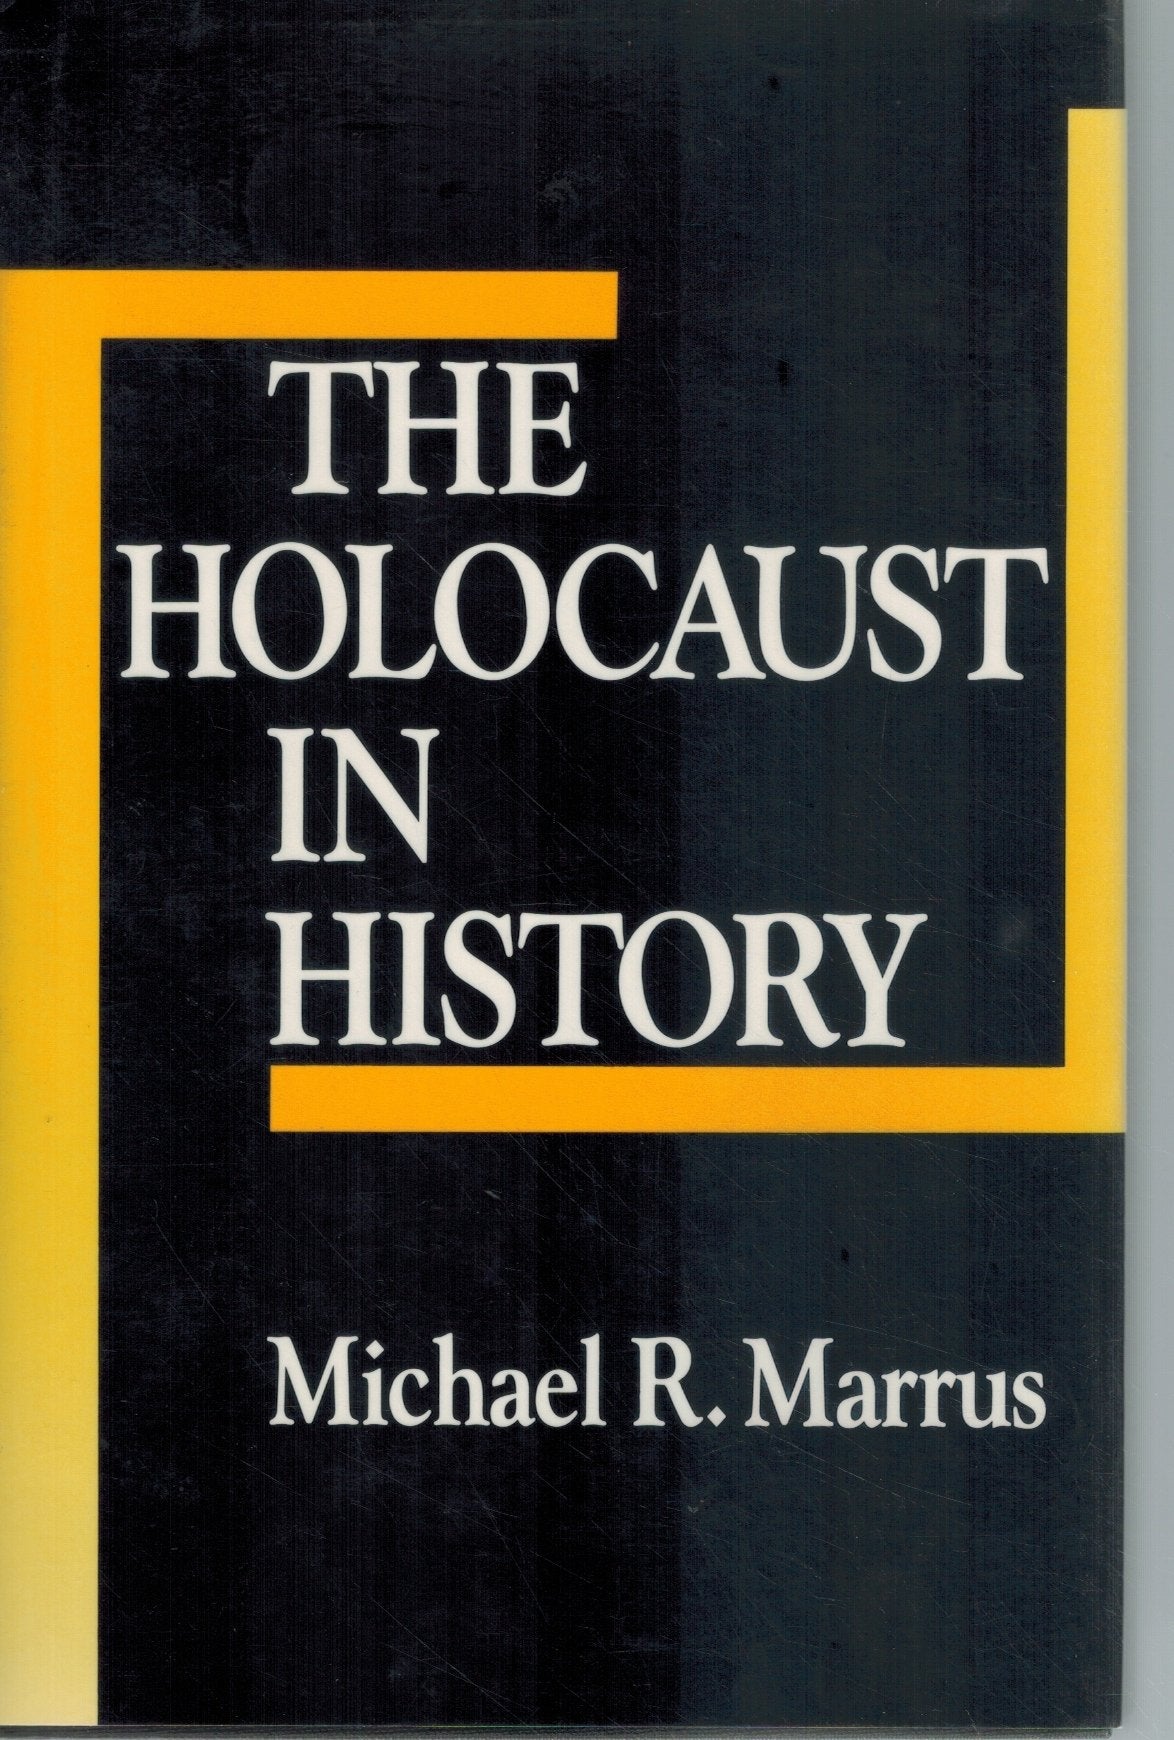 THE HOLOCAUST IN HISTORY  by Marrus, Michael R.